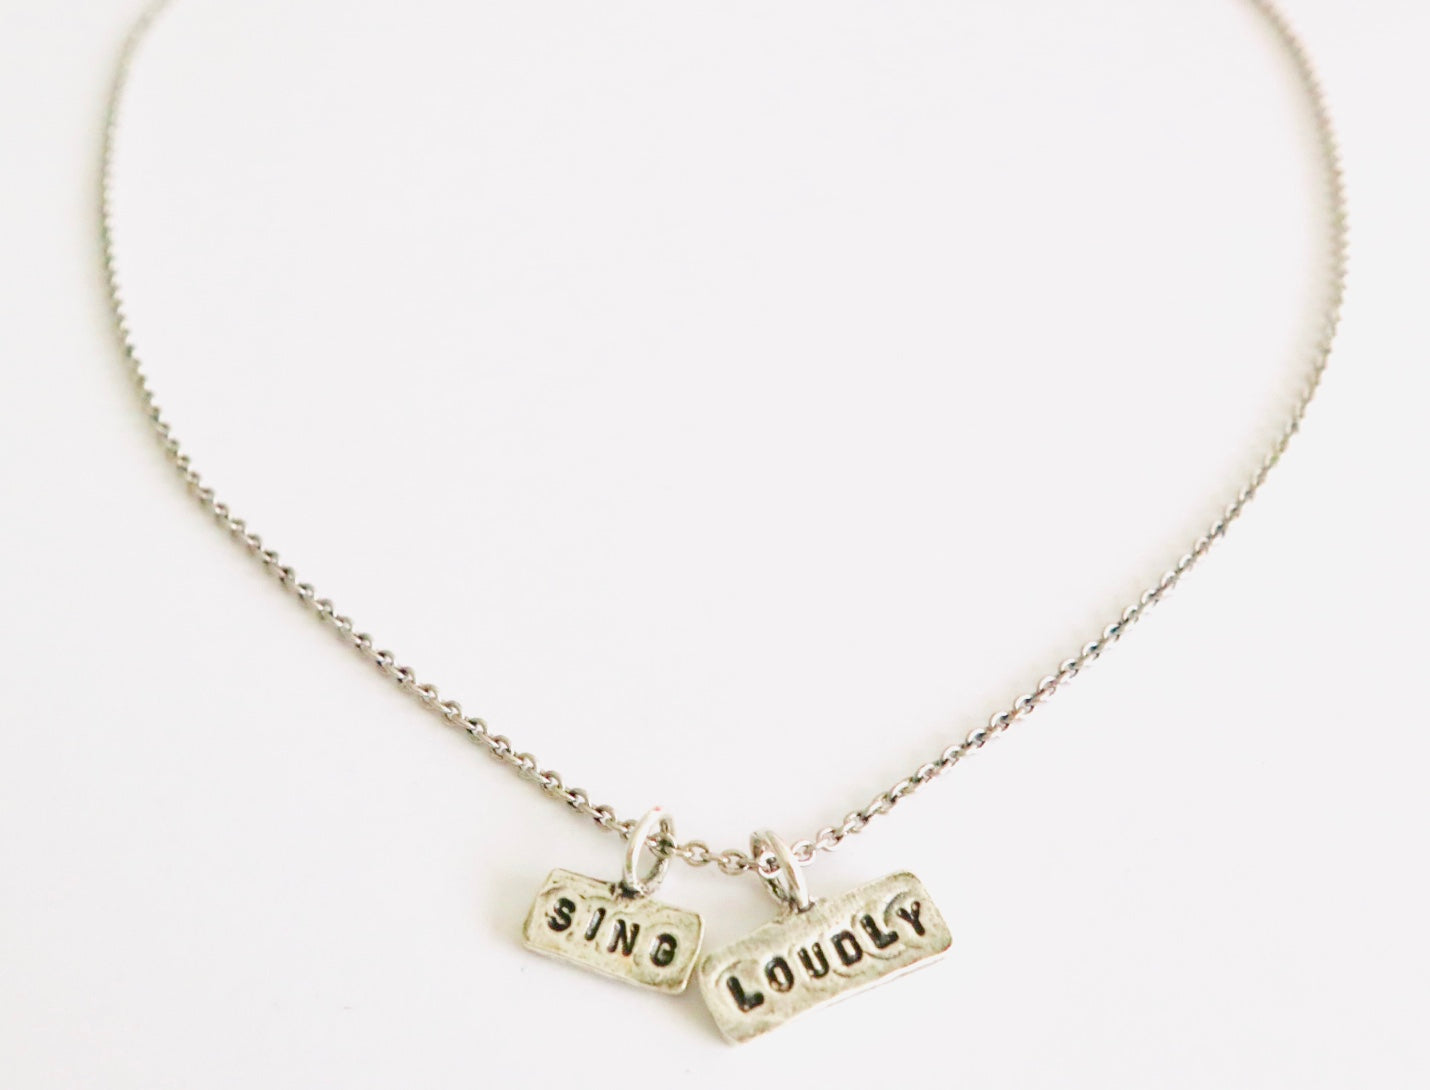 Sing Loudly Necklace